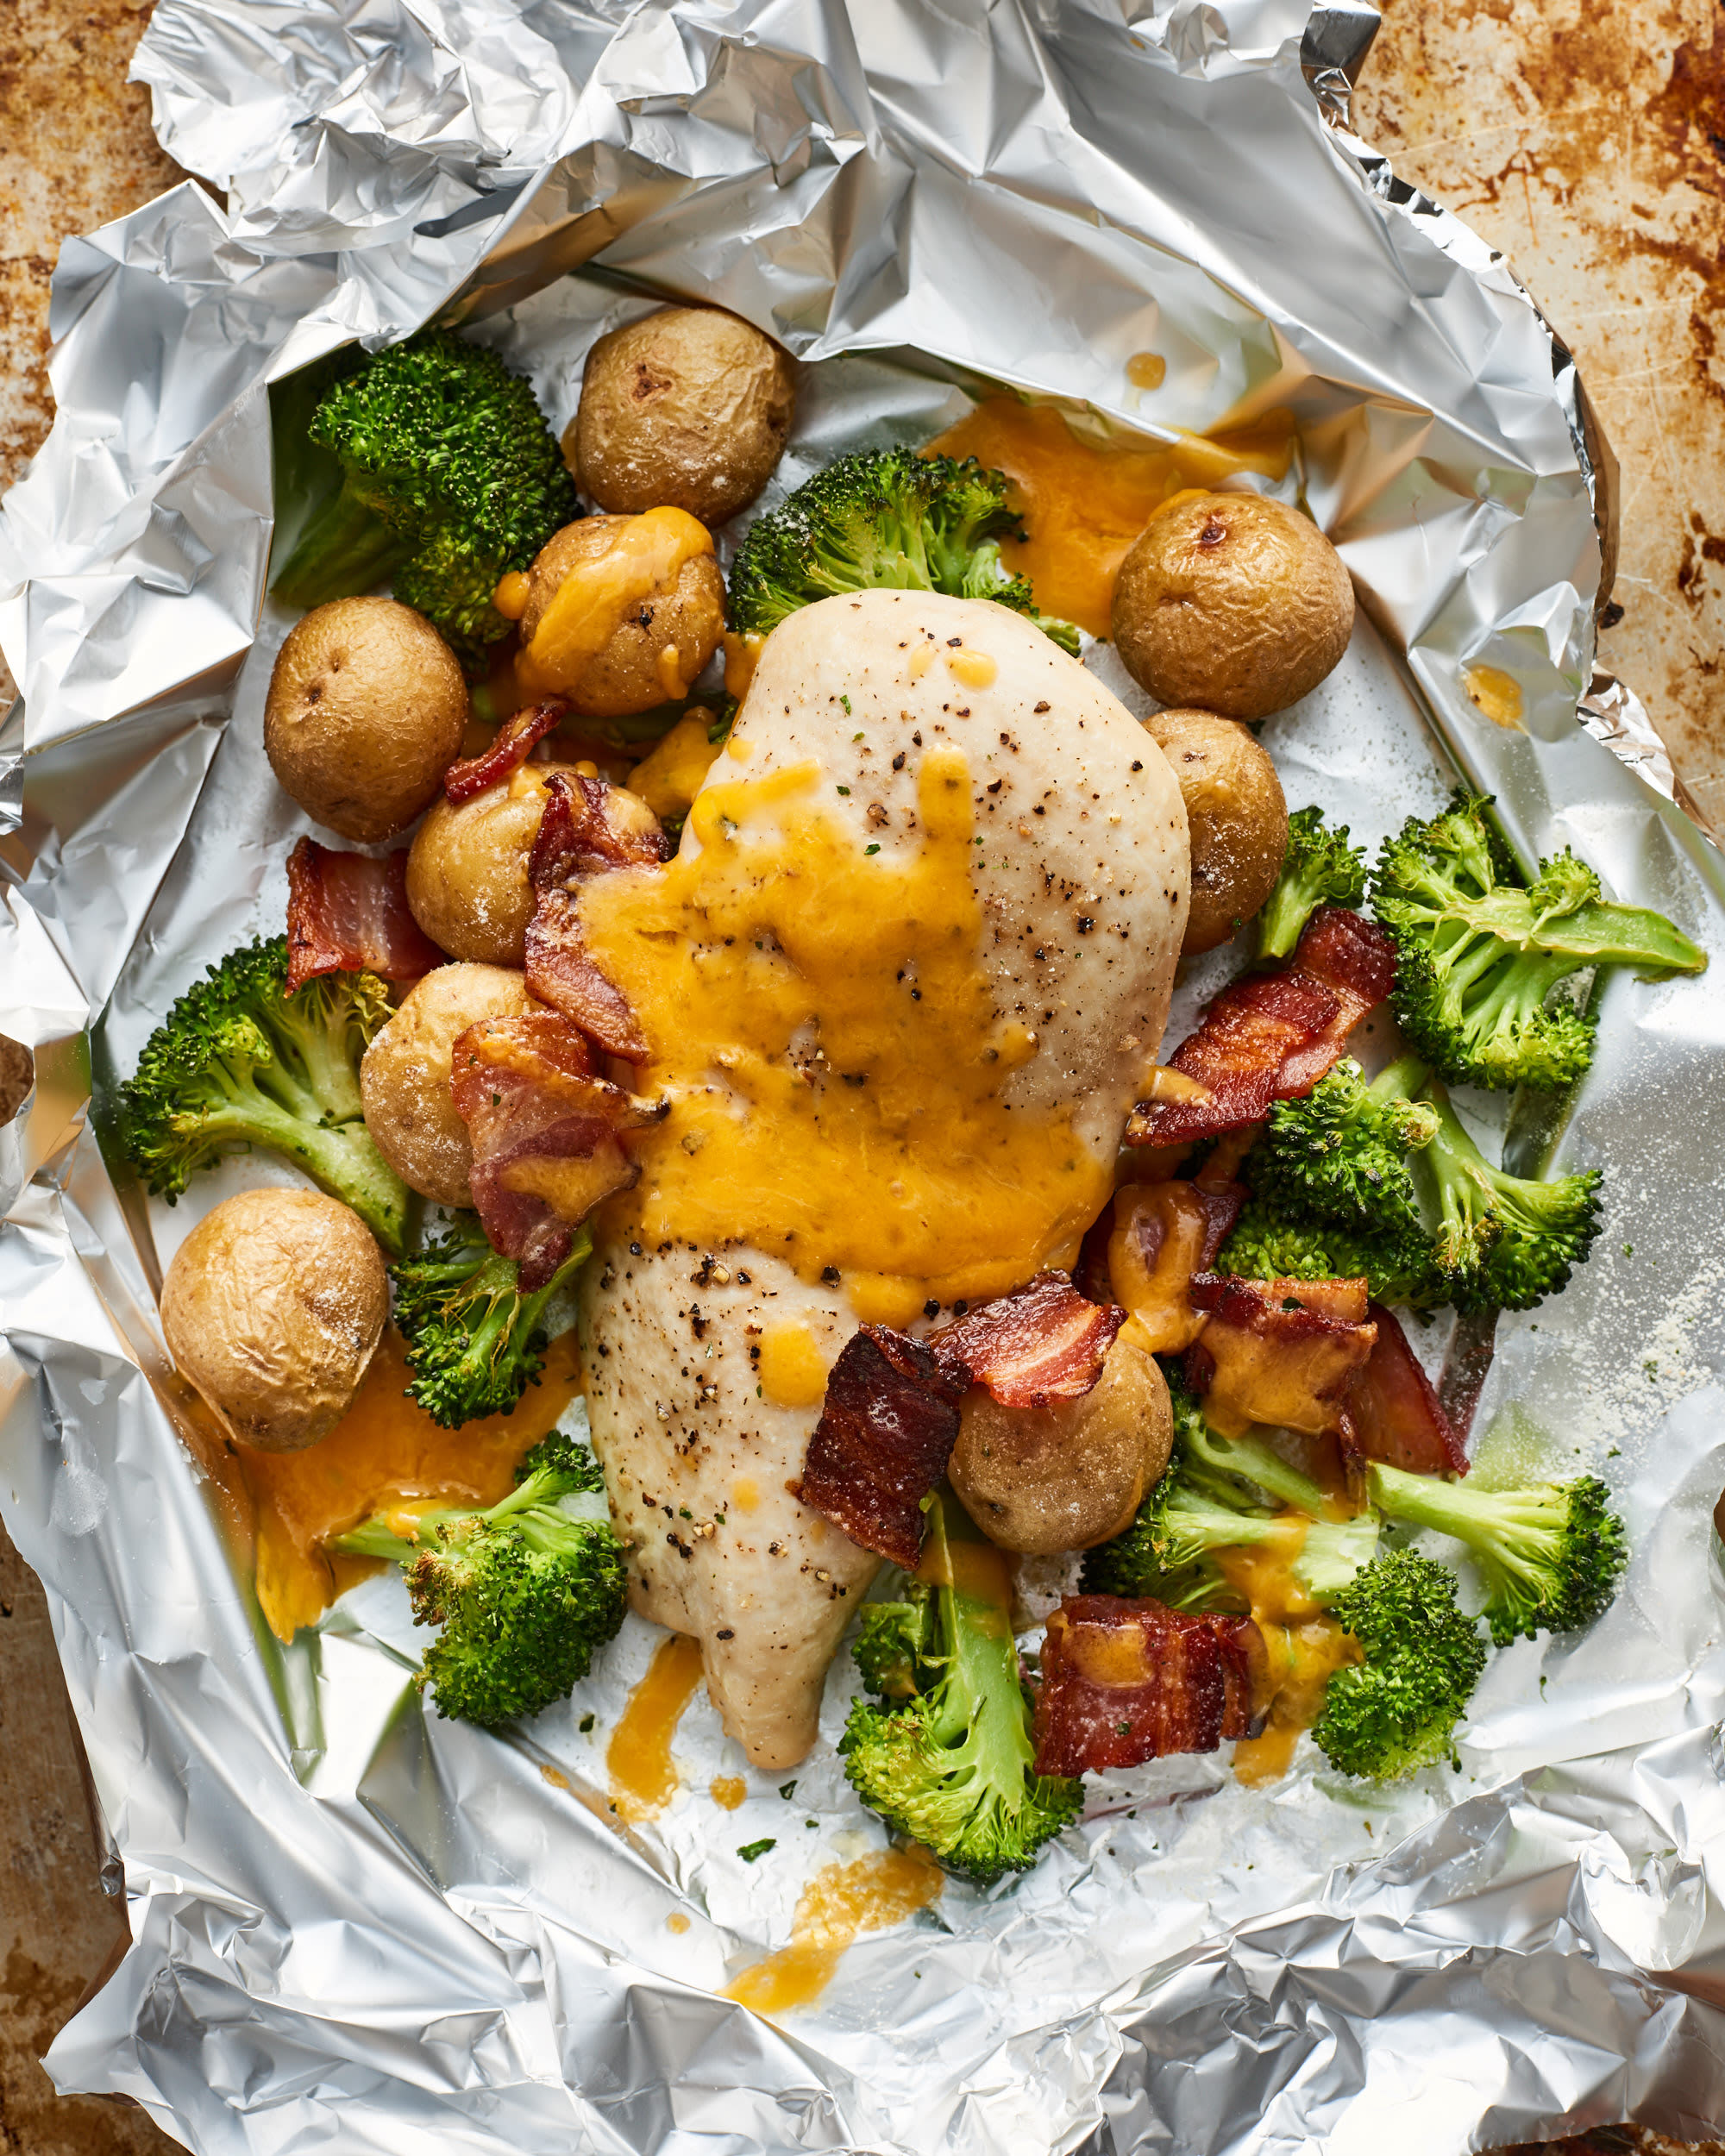 https://cdn.apartmenttherapy.info/image/upload/v1557519532/k/Photo/Series/2019-05-snapshot-cooking-foil-packets/Snapshot-Foil-Packets-Ranch-Chicken-Bacon_1.jpg